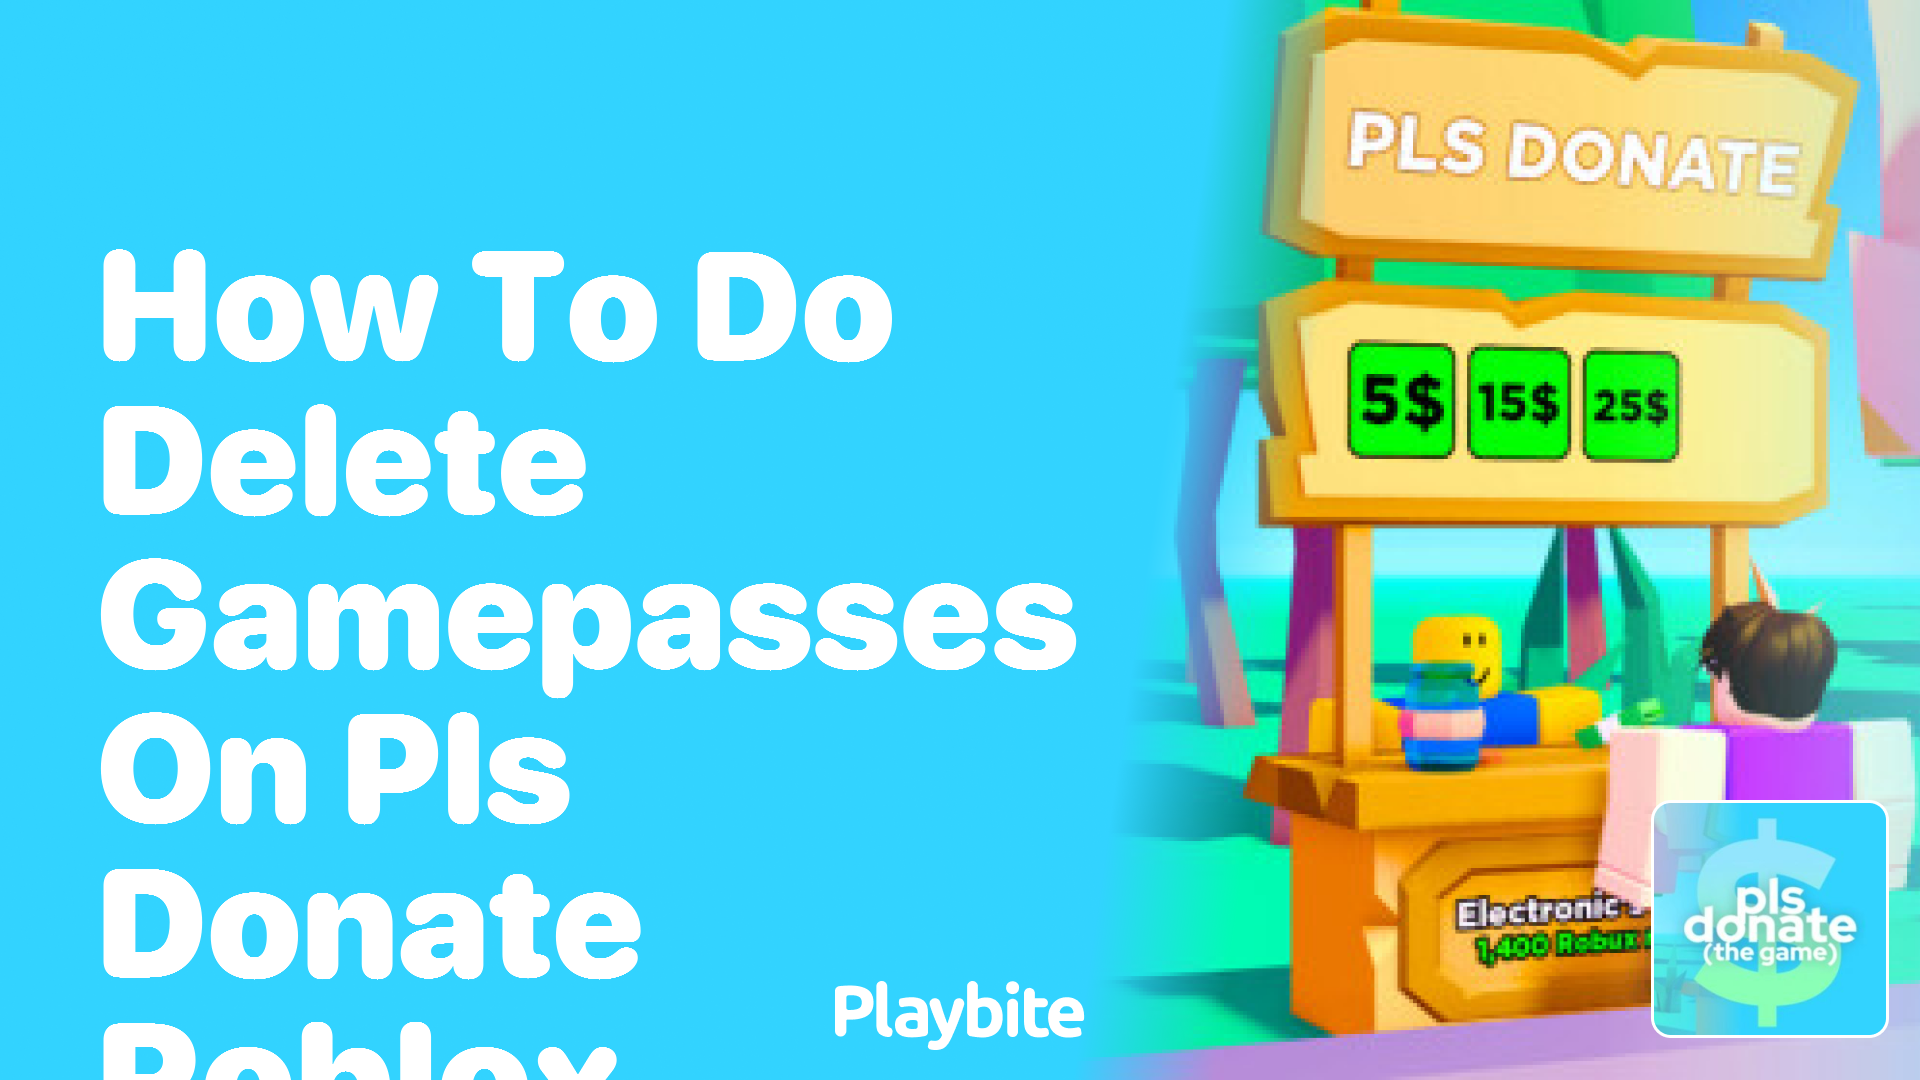 How to Delete Gamepasses on PLS DONATE Roblox